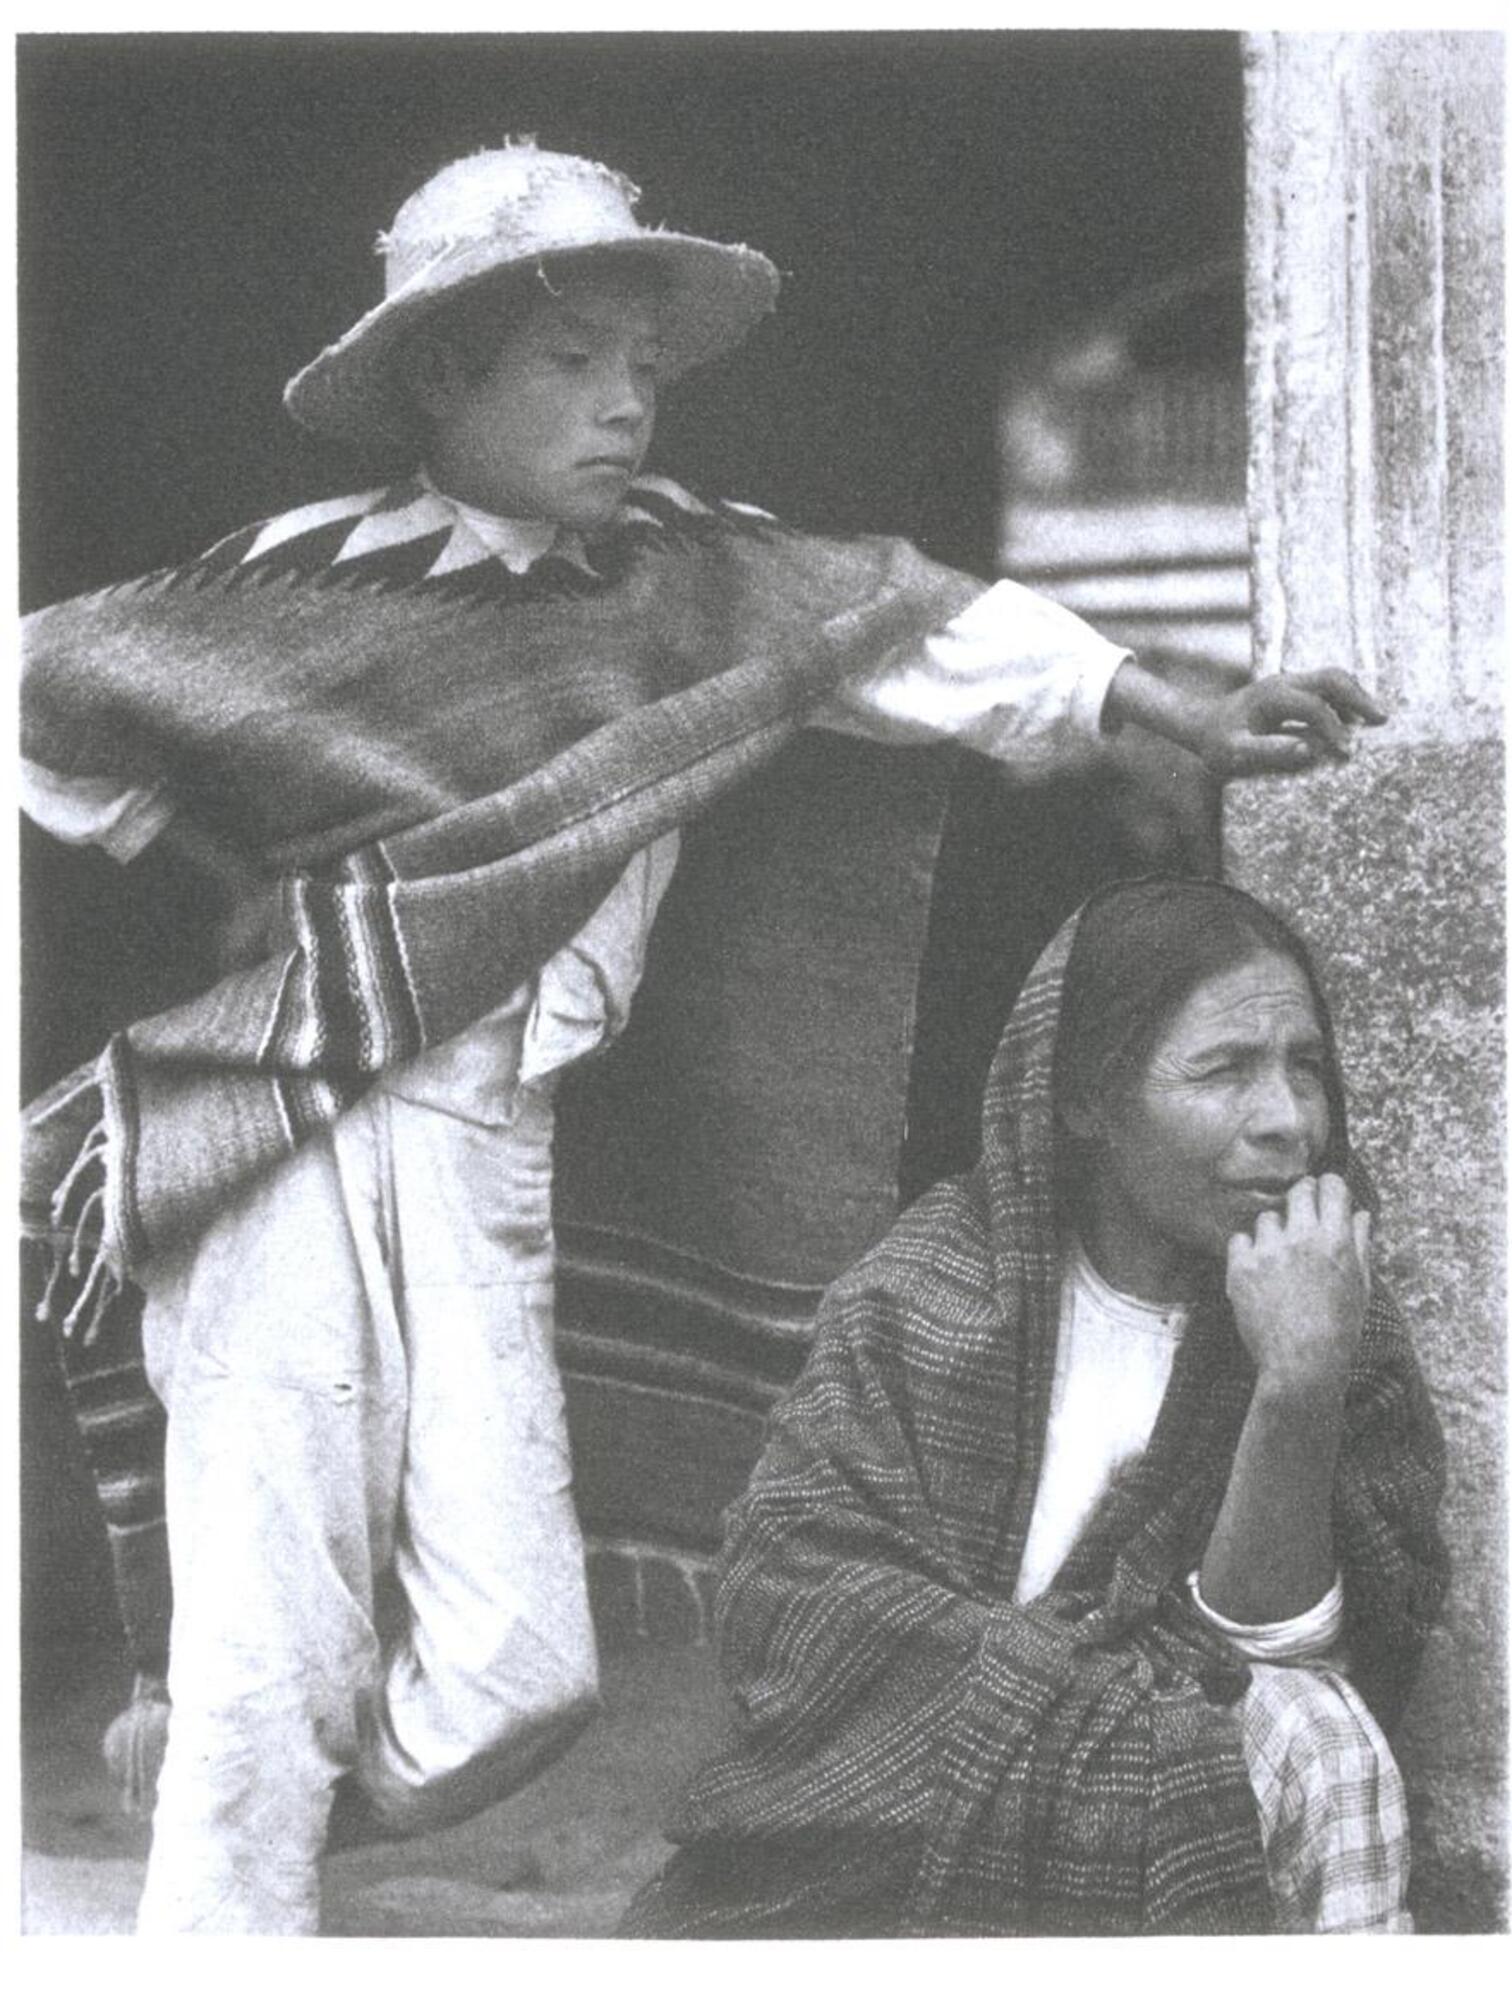 Portrait of a young boy and woman. The boy stands with his right arm akimbo and his left arm resting on the corner of a building. The woman crouches next to the building, with her head just below the boy's arm.